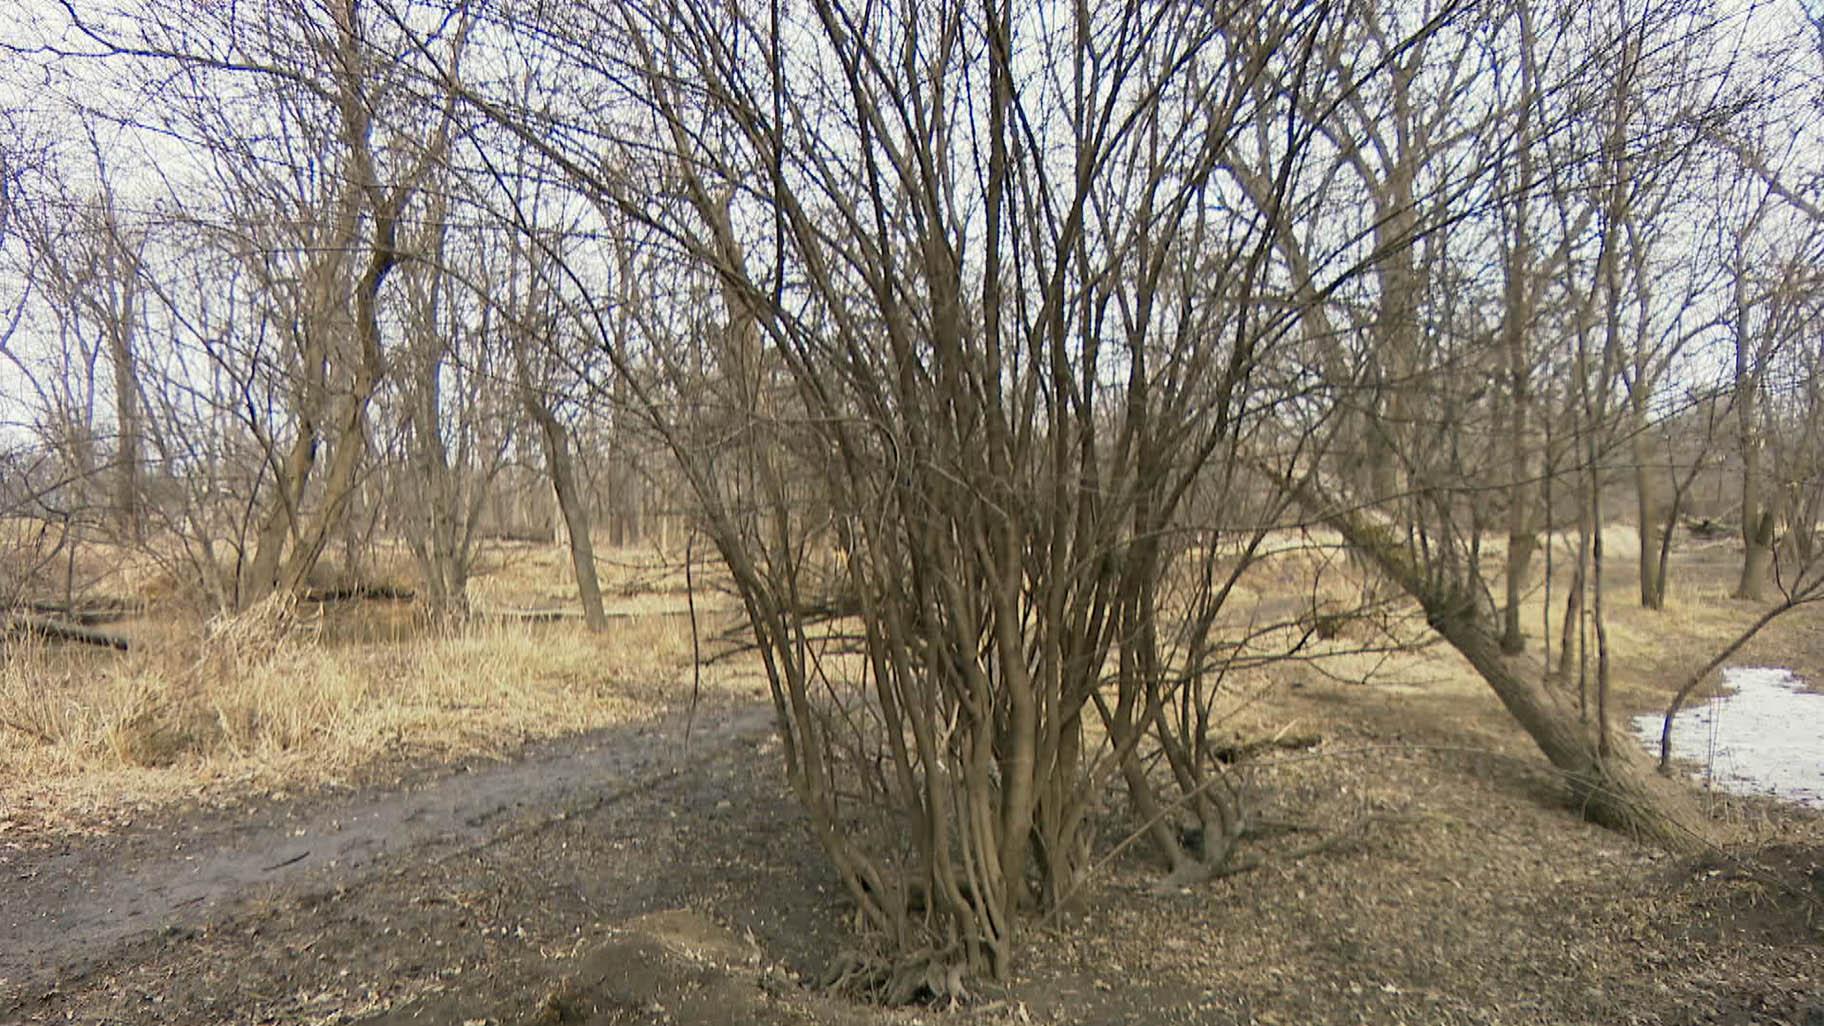 A thicket of European buckthorn, the most prevalent invasive tree species in Chicago, grows in Caldwell Woods on March 4, 2022. (WTTW News)